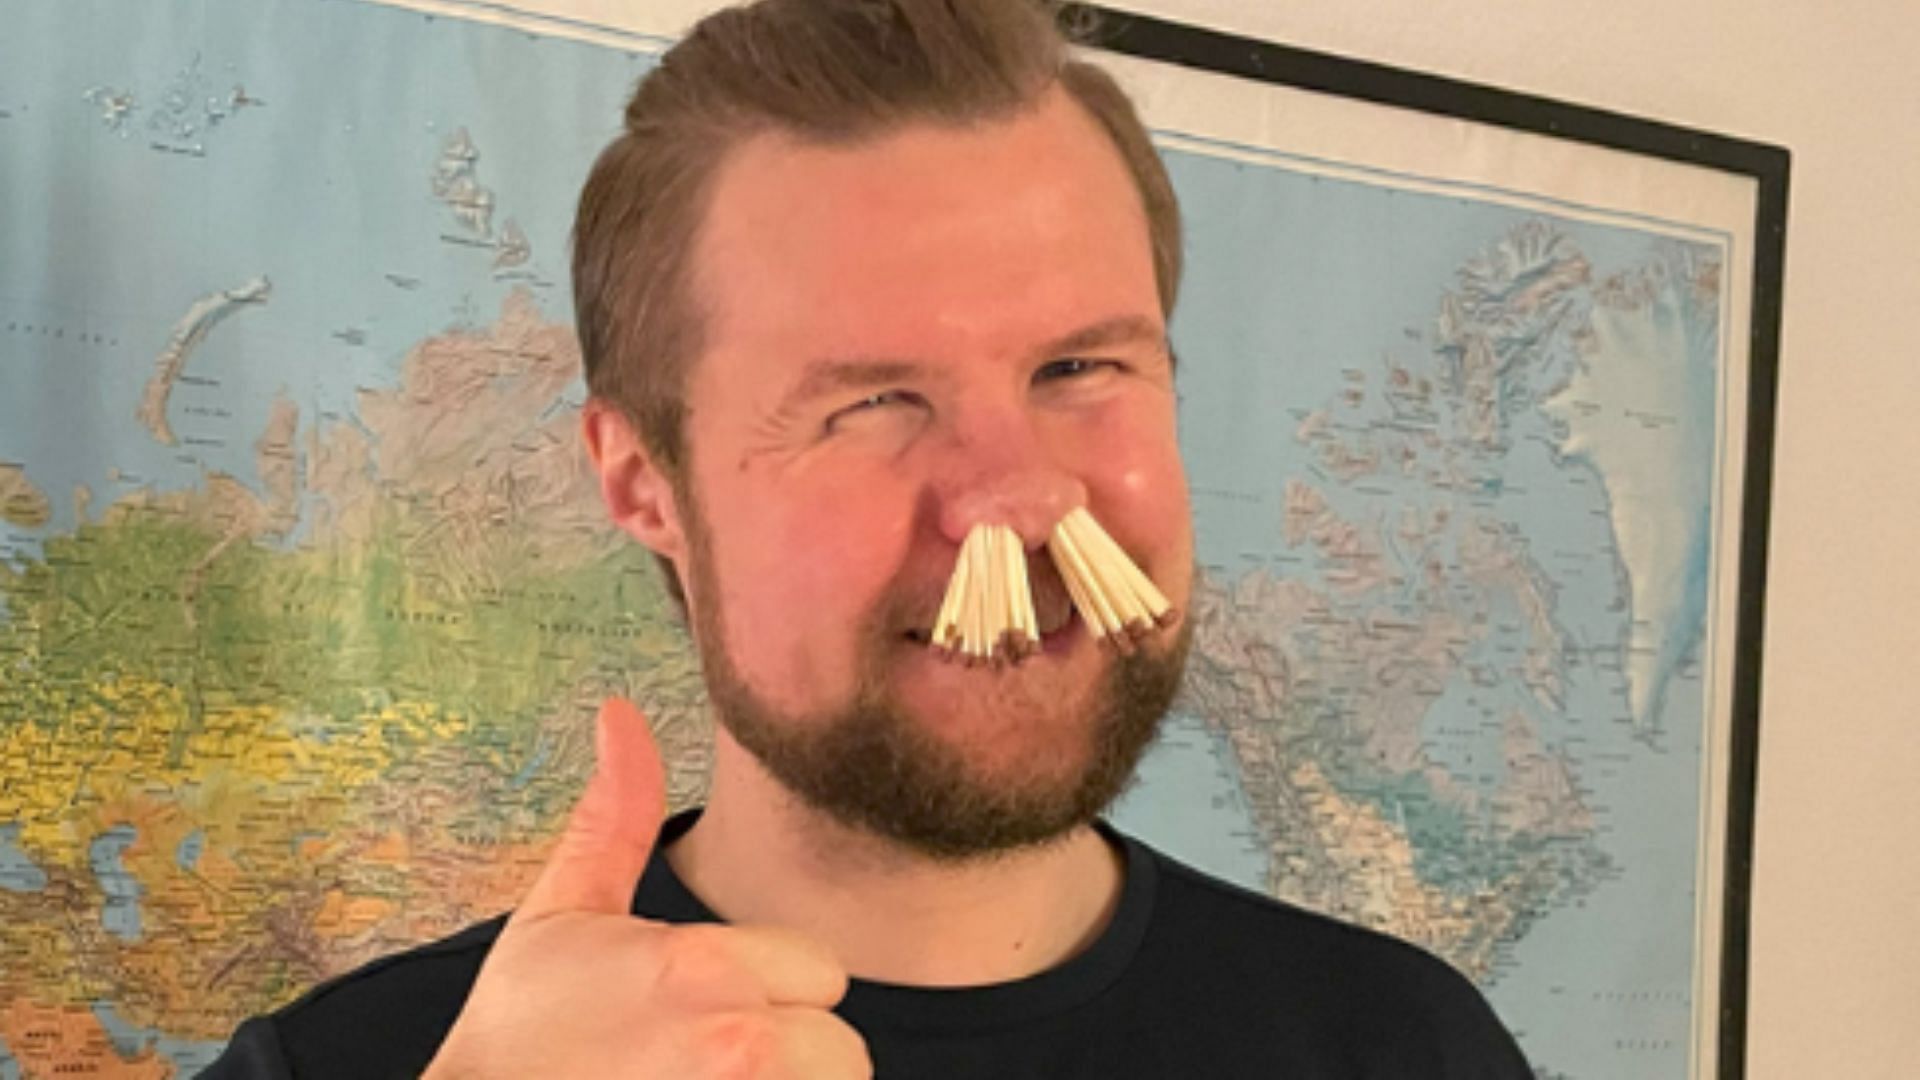 Guinness World Records Danish dad crams 68 matchsticks up his nose to set world record